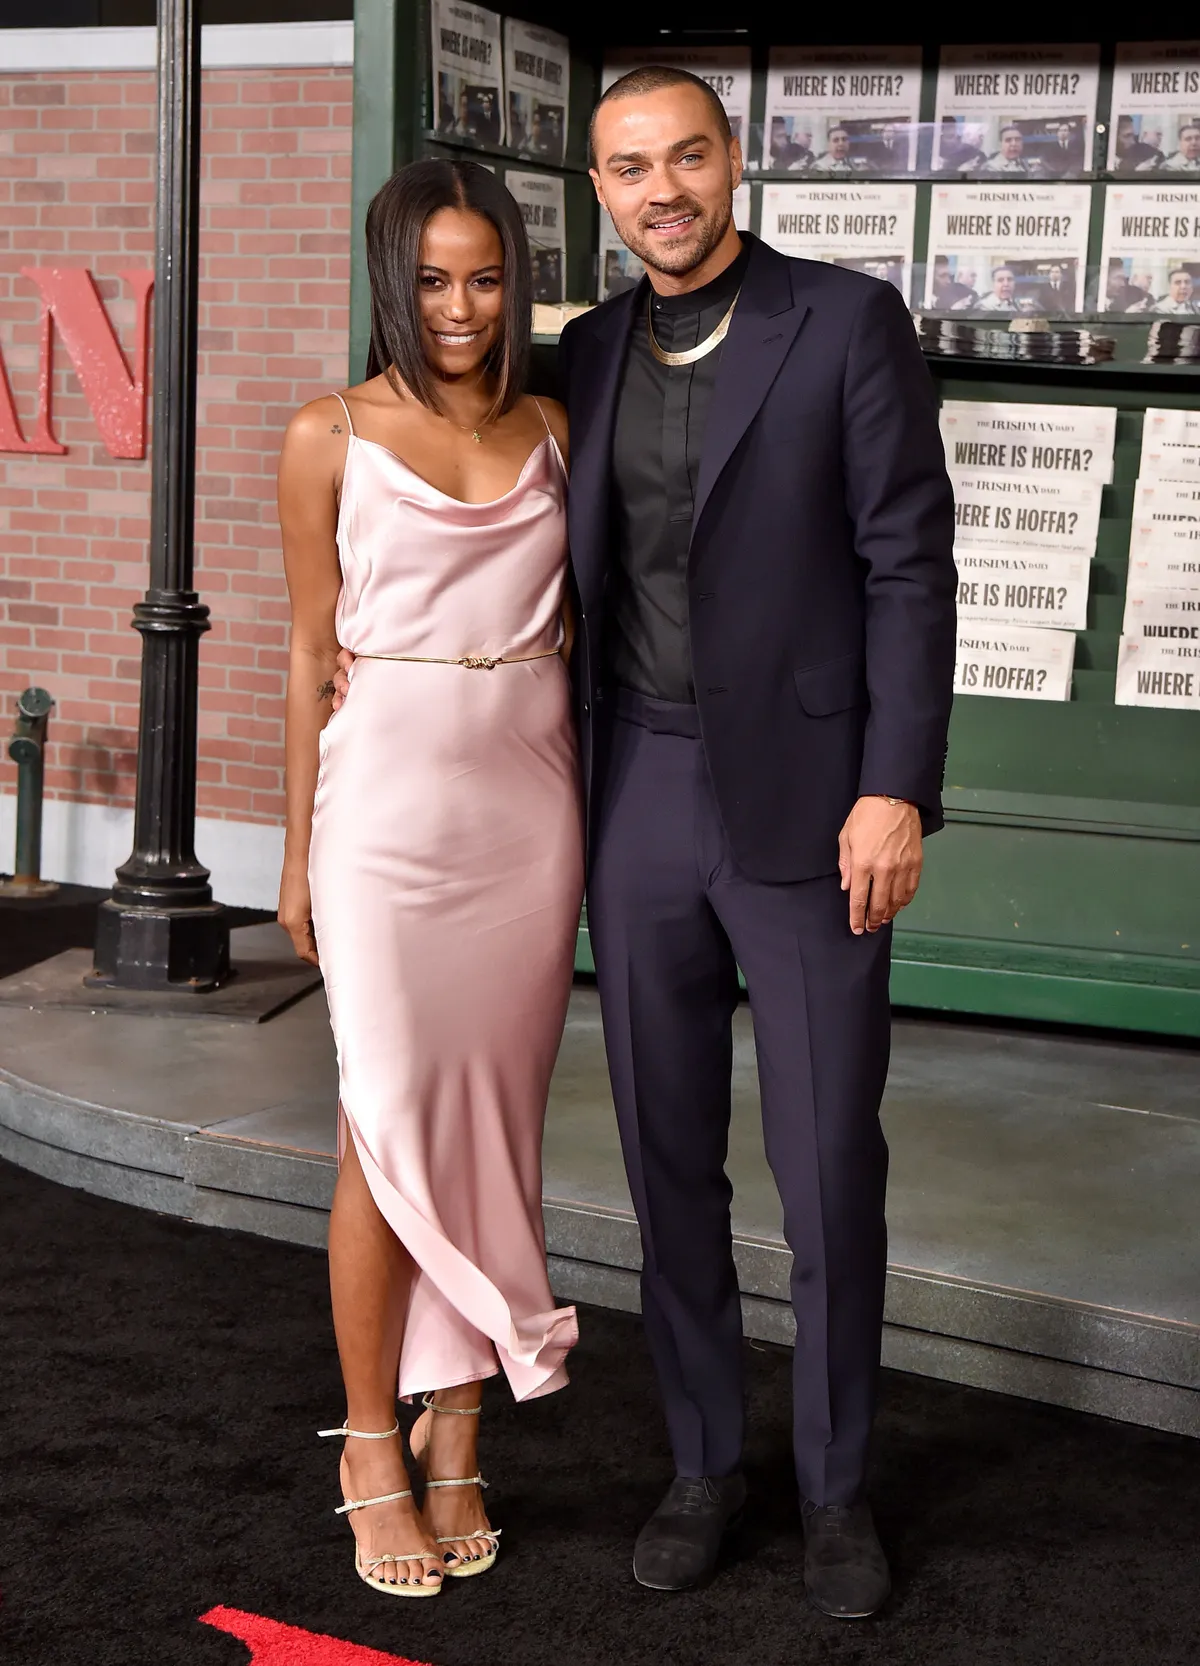 Jesse Williams and Taylour Paige at the Premiere of Netflix's "The Irishman" on October 24, 2019 in Hollywood, California. | Photo: Getty images